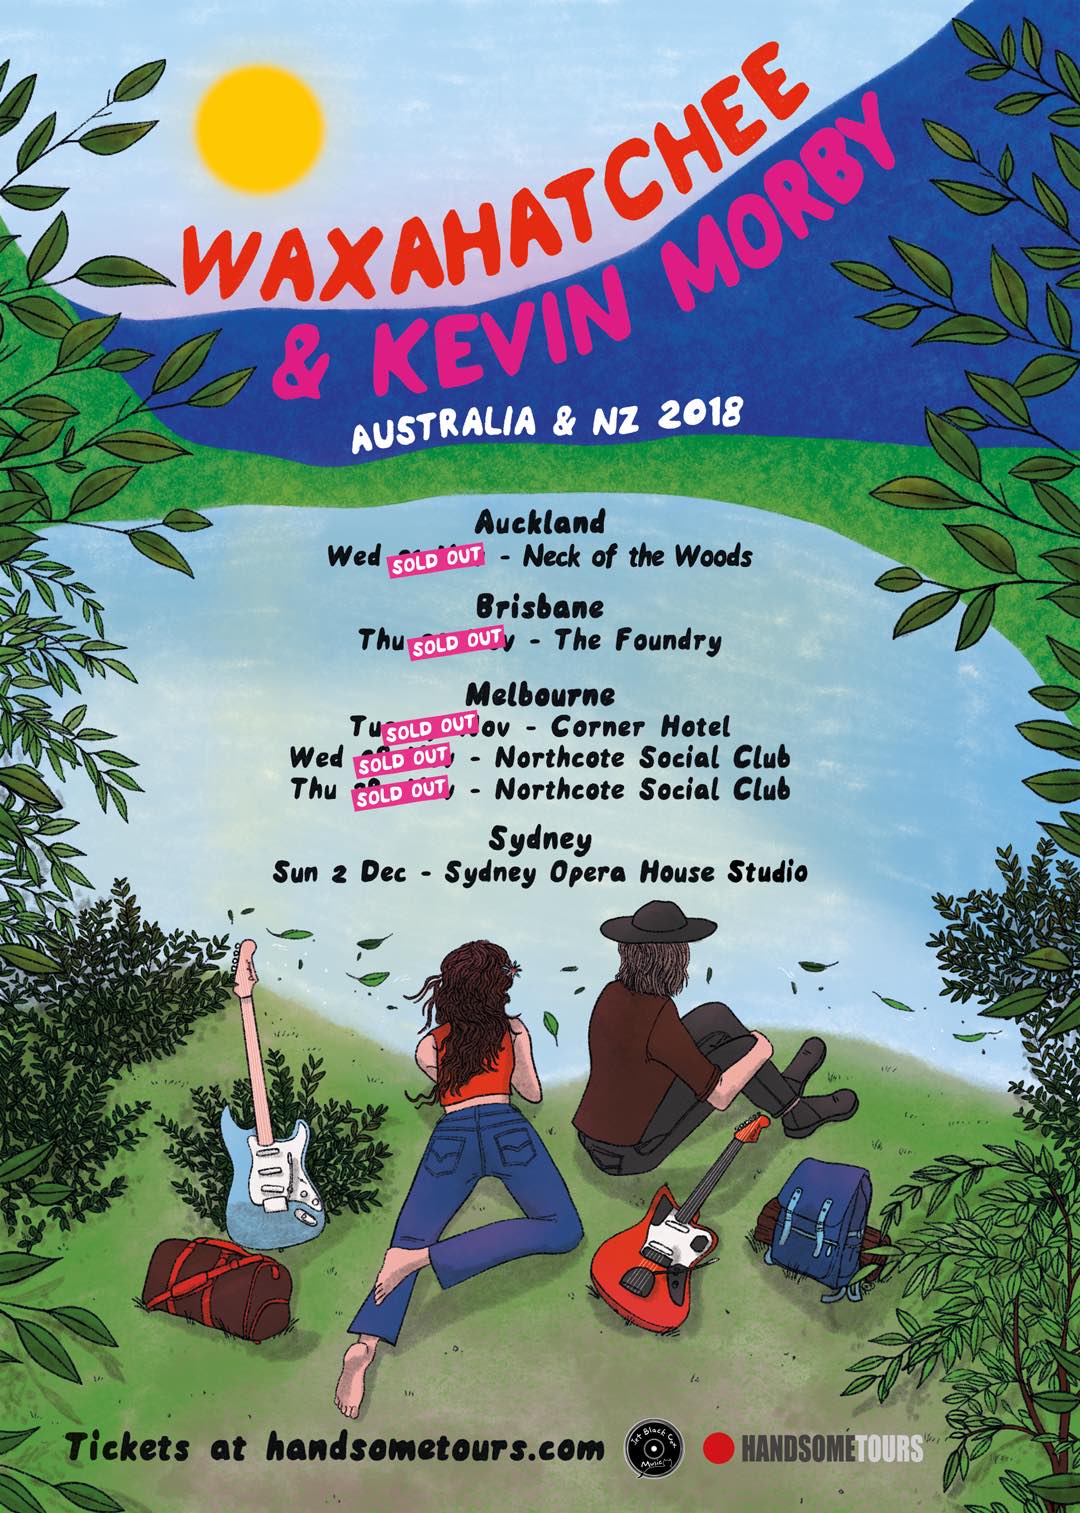 https://www.handsometours.com/wp-content/uploads/2018/08/Waxahatchee-Kevin-Sold-Out-Web-Poster-copy.jpg